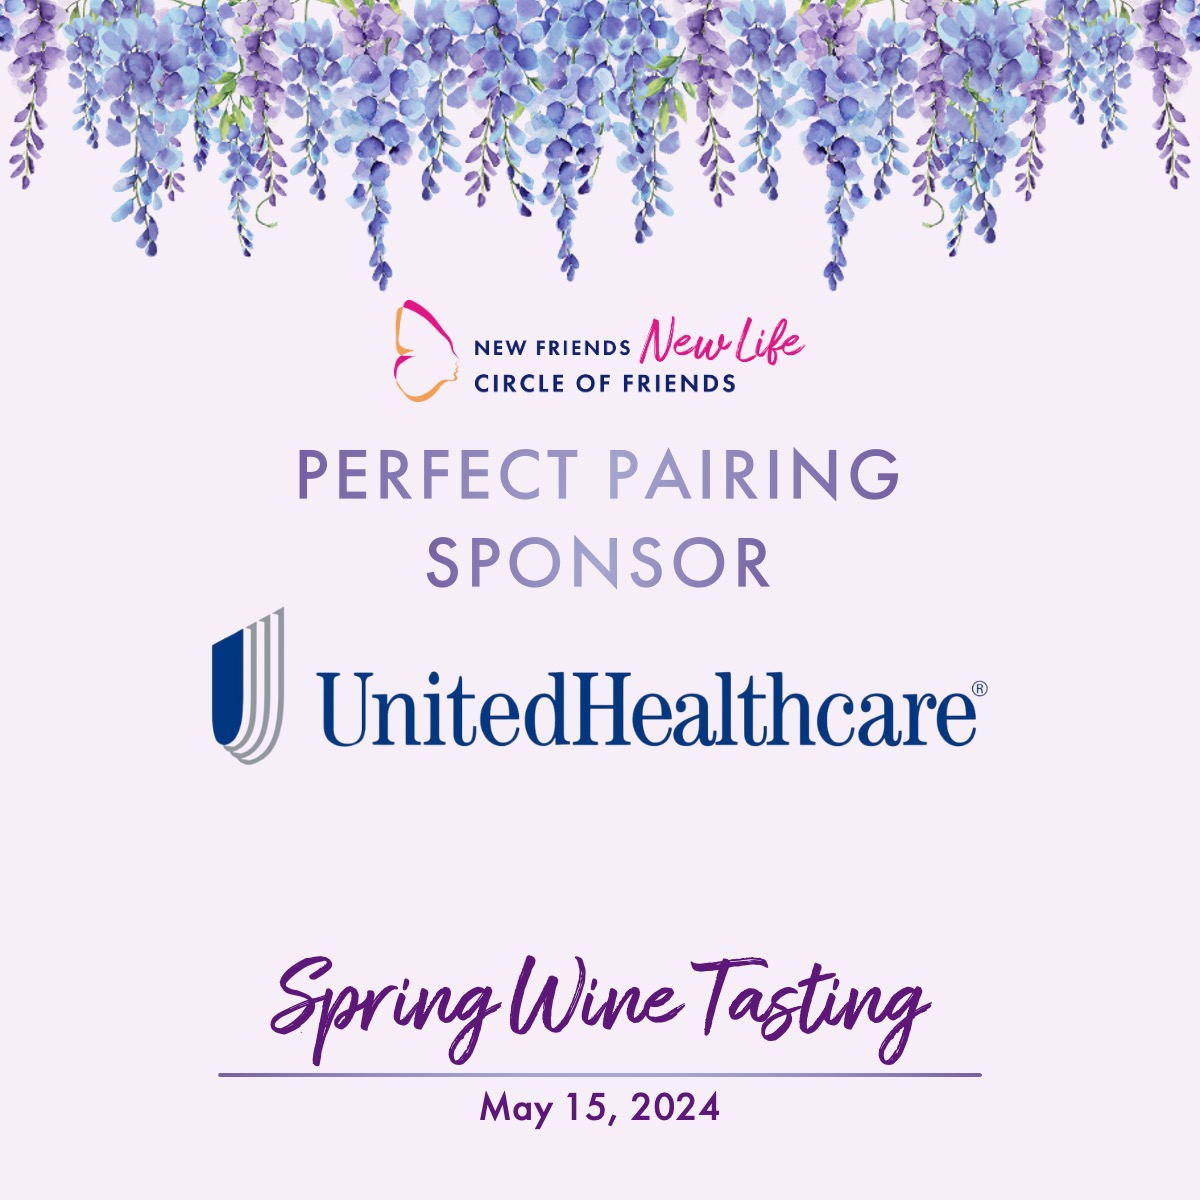 Thank you to our amazing Perfect Pairing Sponsor, @UHC, for their support in our upcoming Spring Wine Tasting at Liberty Street Garden! Join us and take a #StandForHer by purchasing sponsorships and tickets at bit.ly/4aDZAXL.